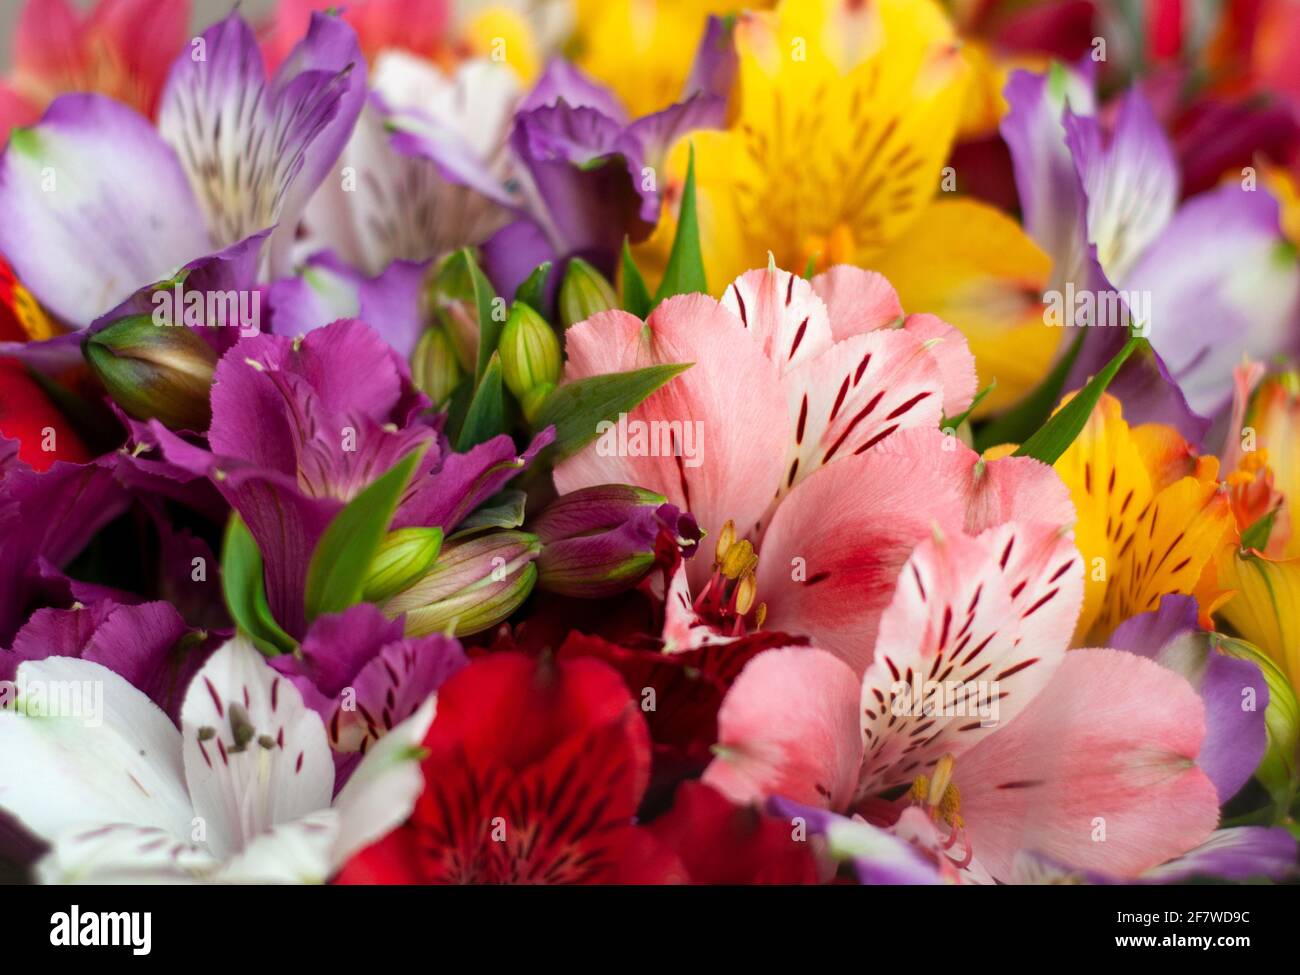 Beautiful floral alstroemeria background. Alstroemeria flowers are colorful. Purple, red, yellow, pink Peruvian lilies. Stock Photo